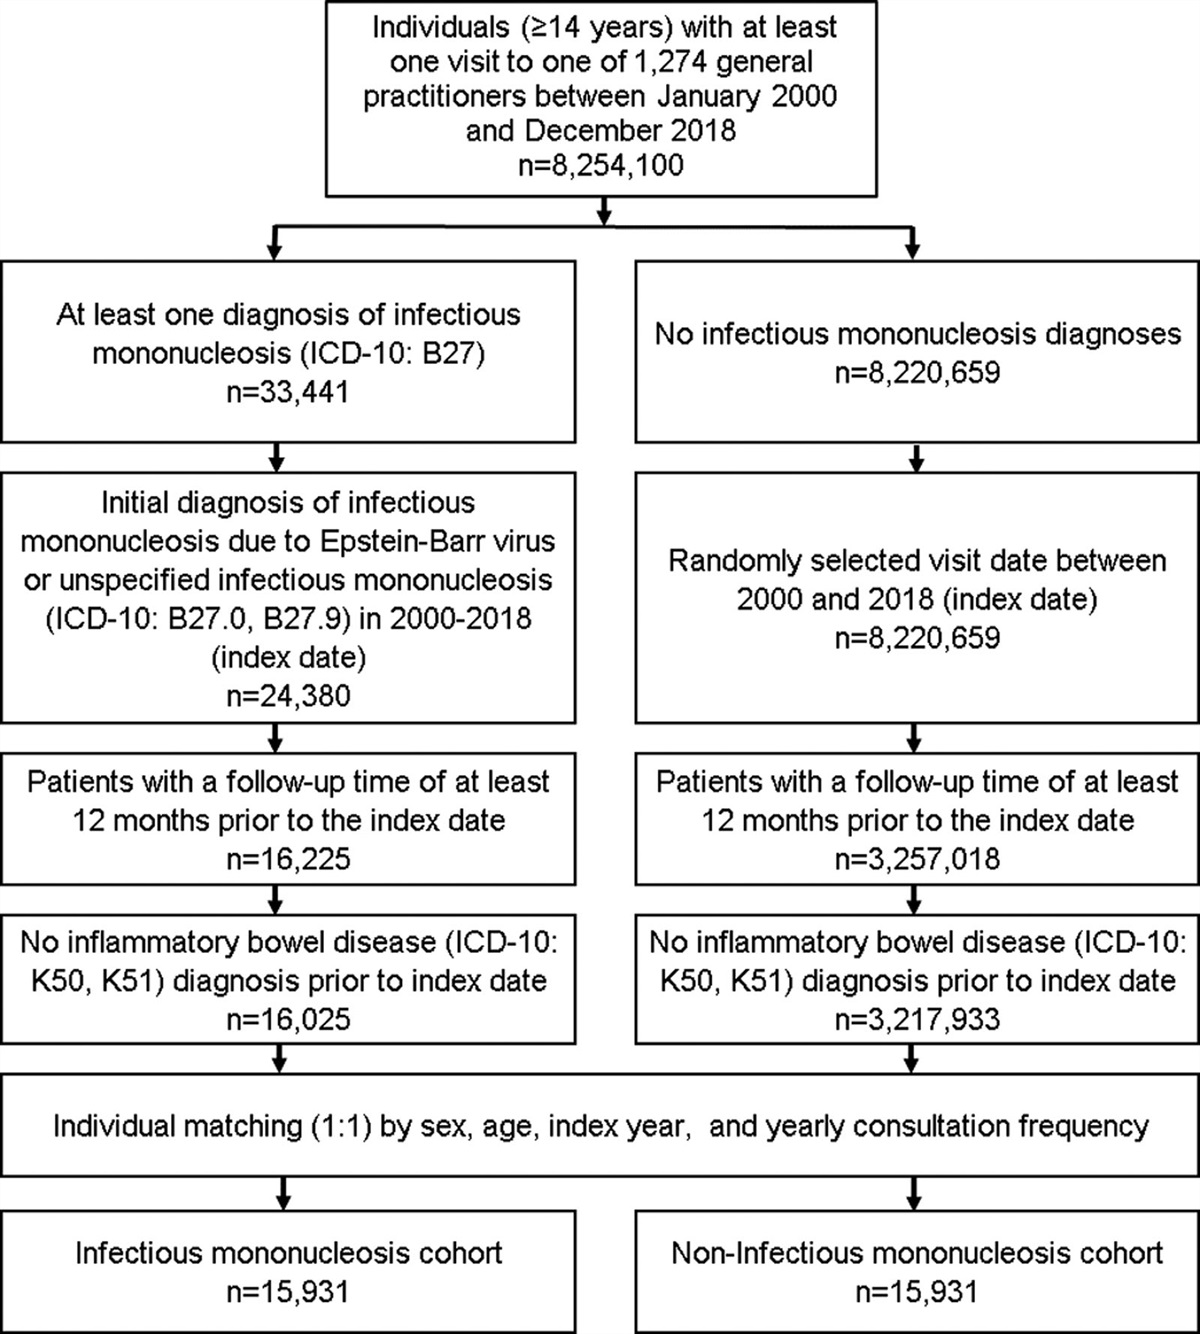 Infectious mononucleosis is associated with an increased incidence of Crohn’s disease: results from a cohort study of 31 862 outpatients in Germany